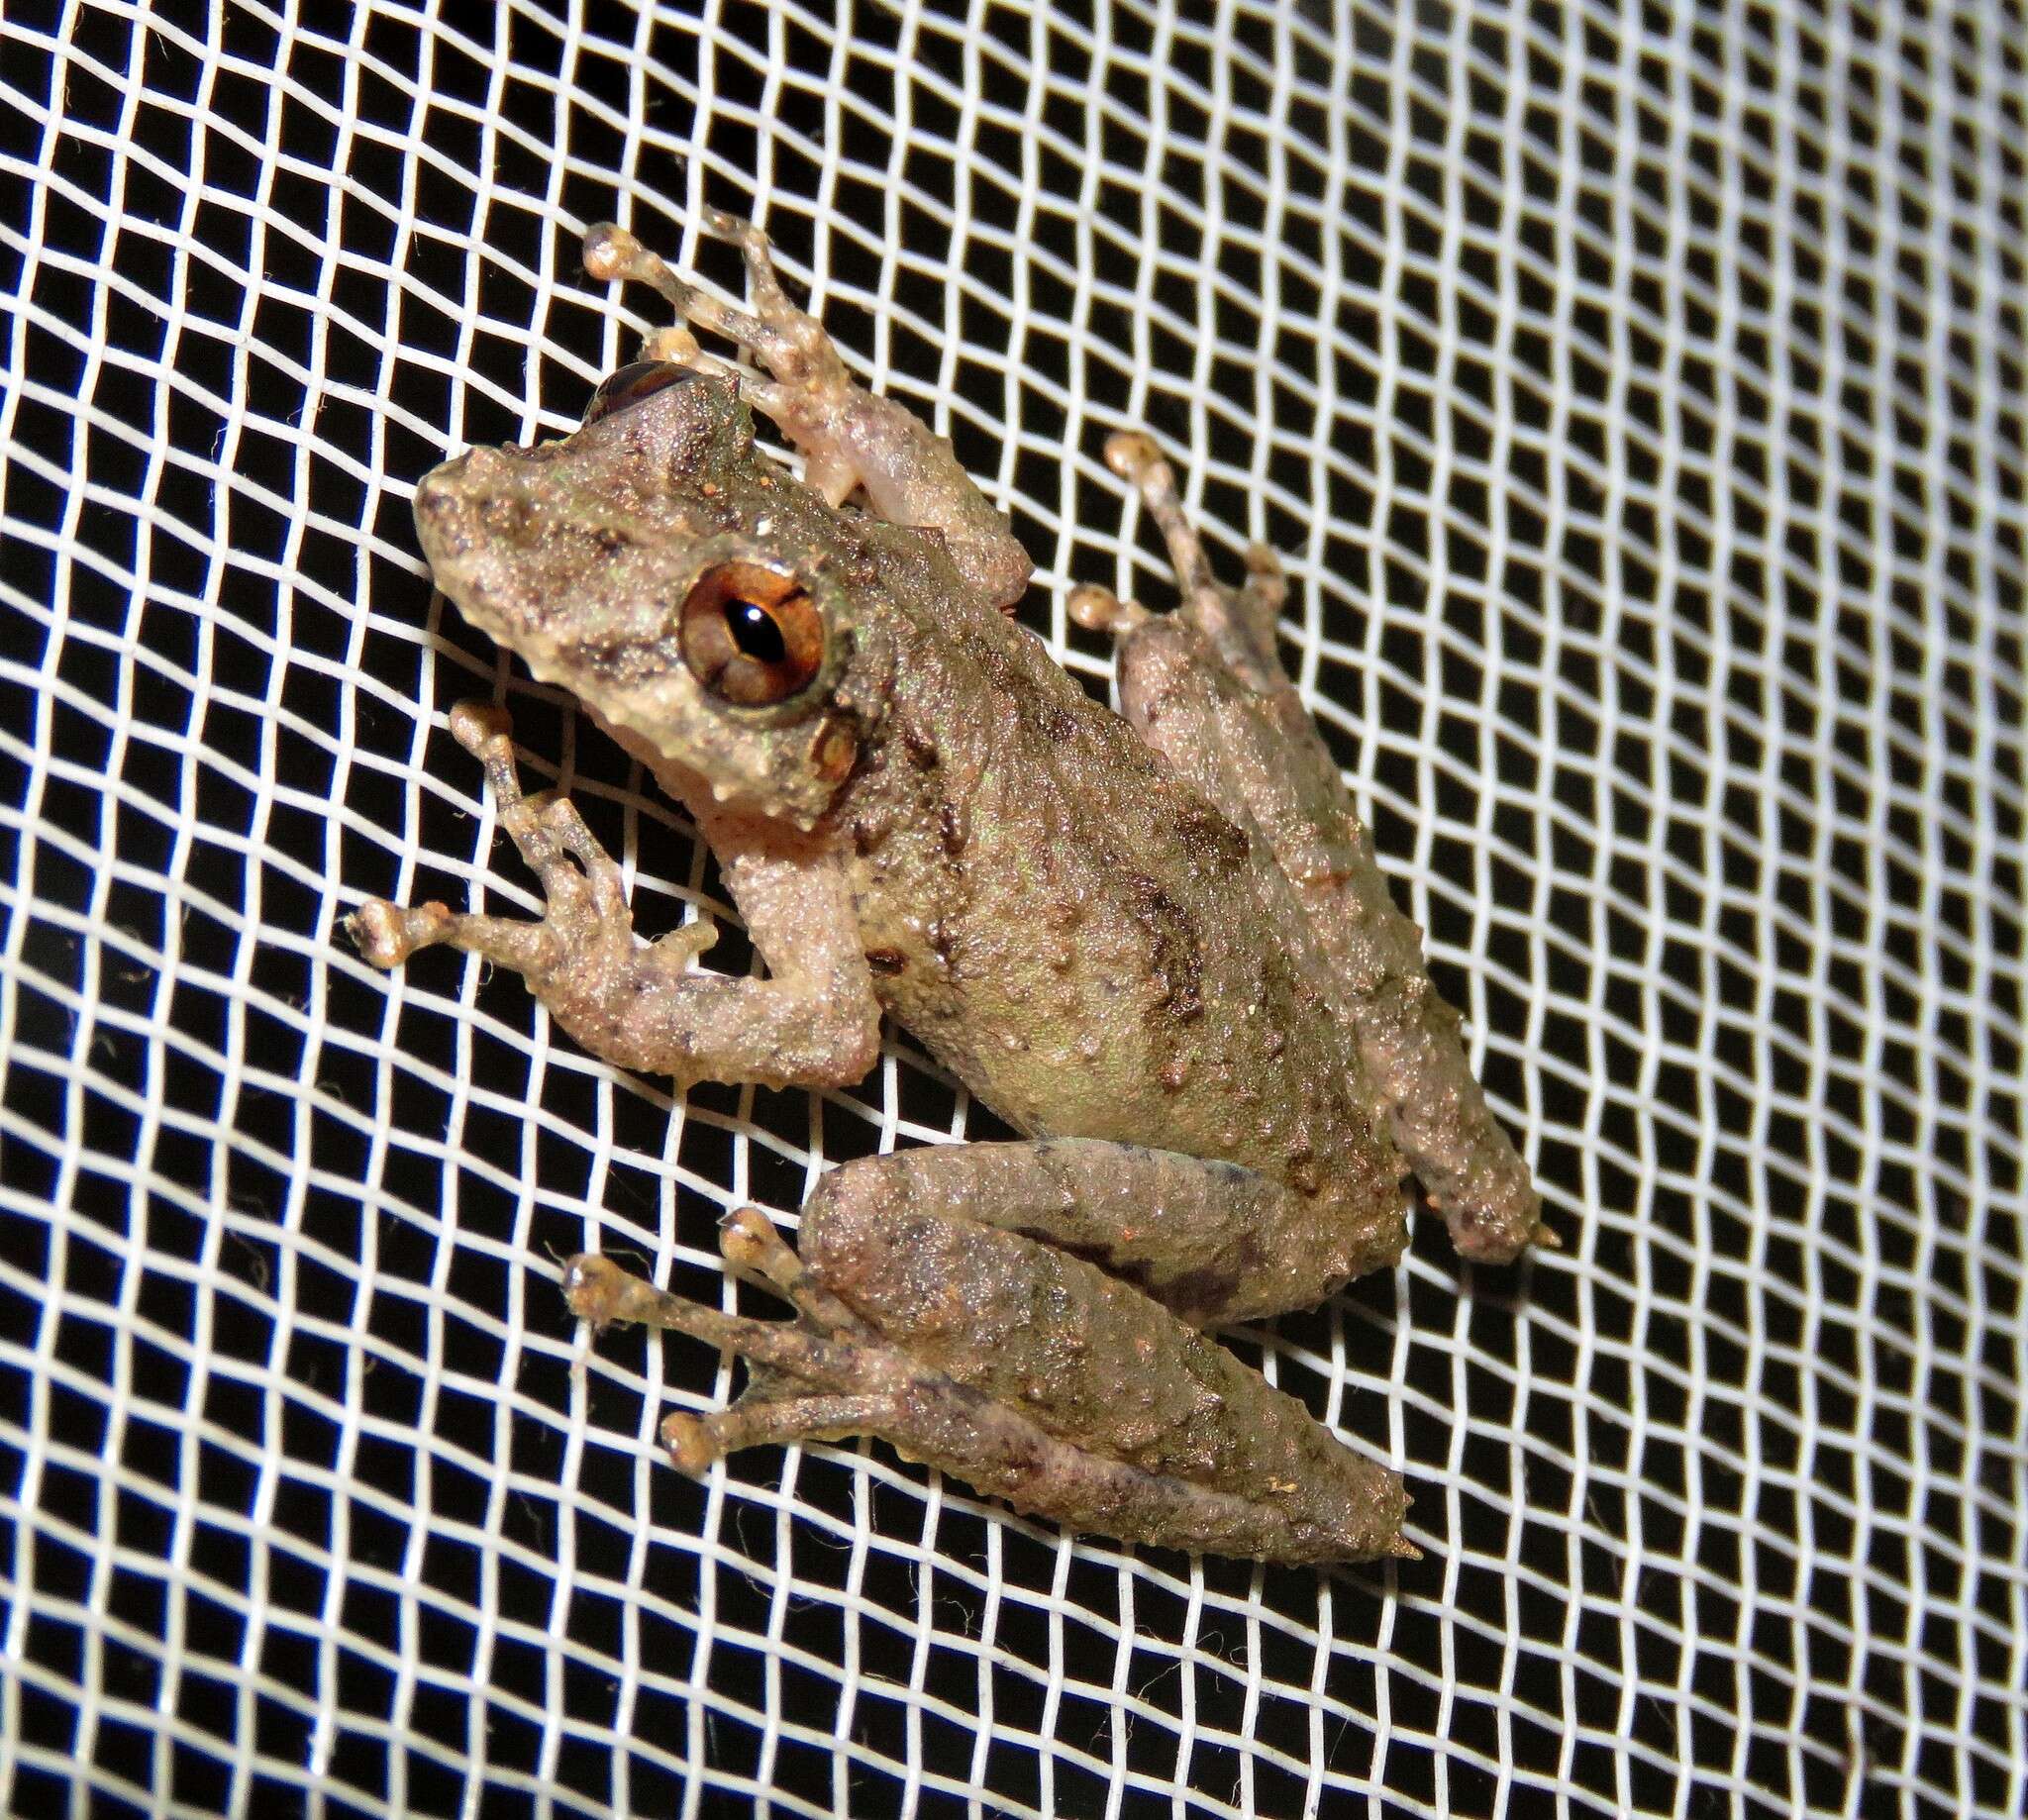 Image of Spix's snouted tree frog